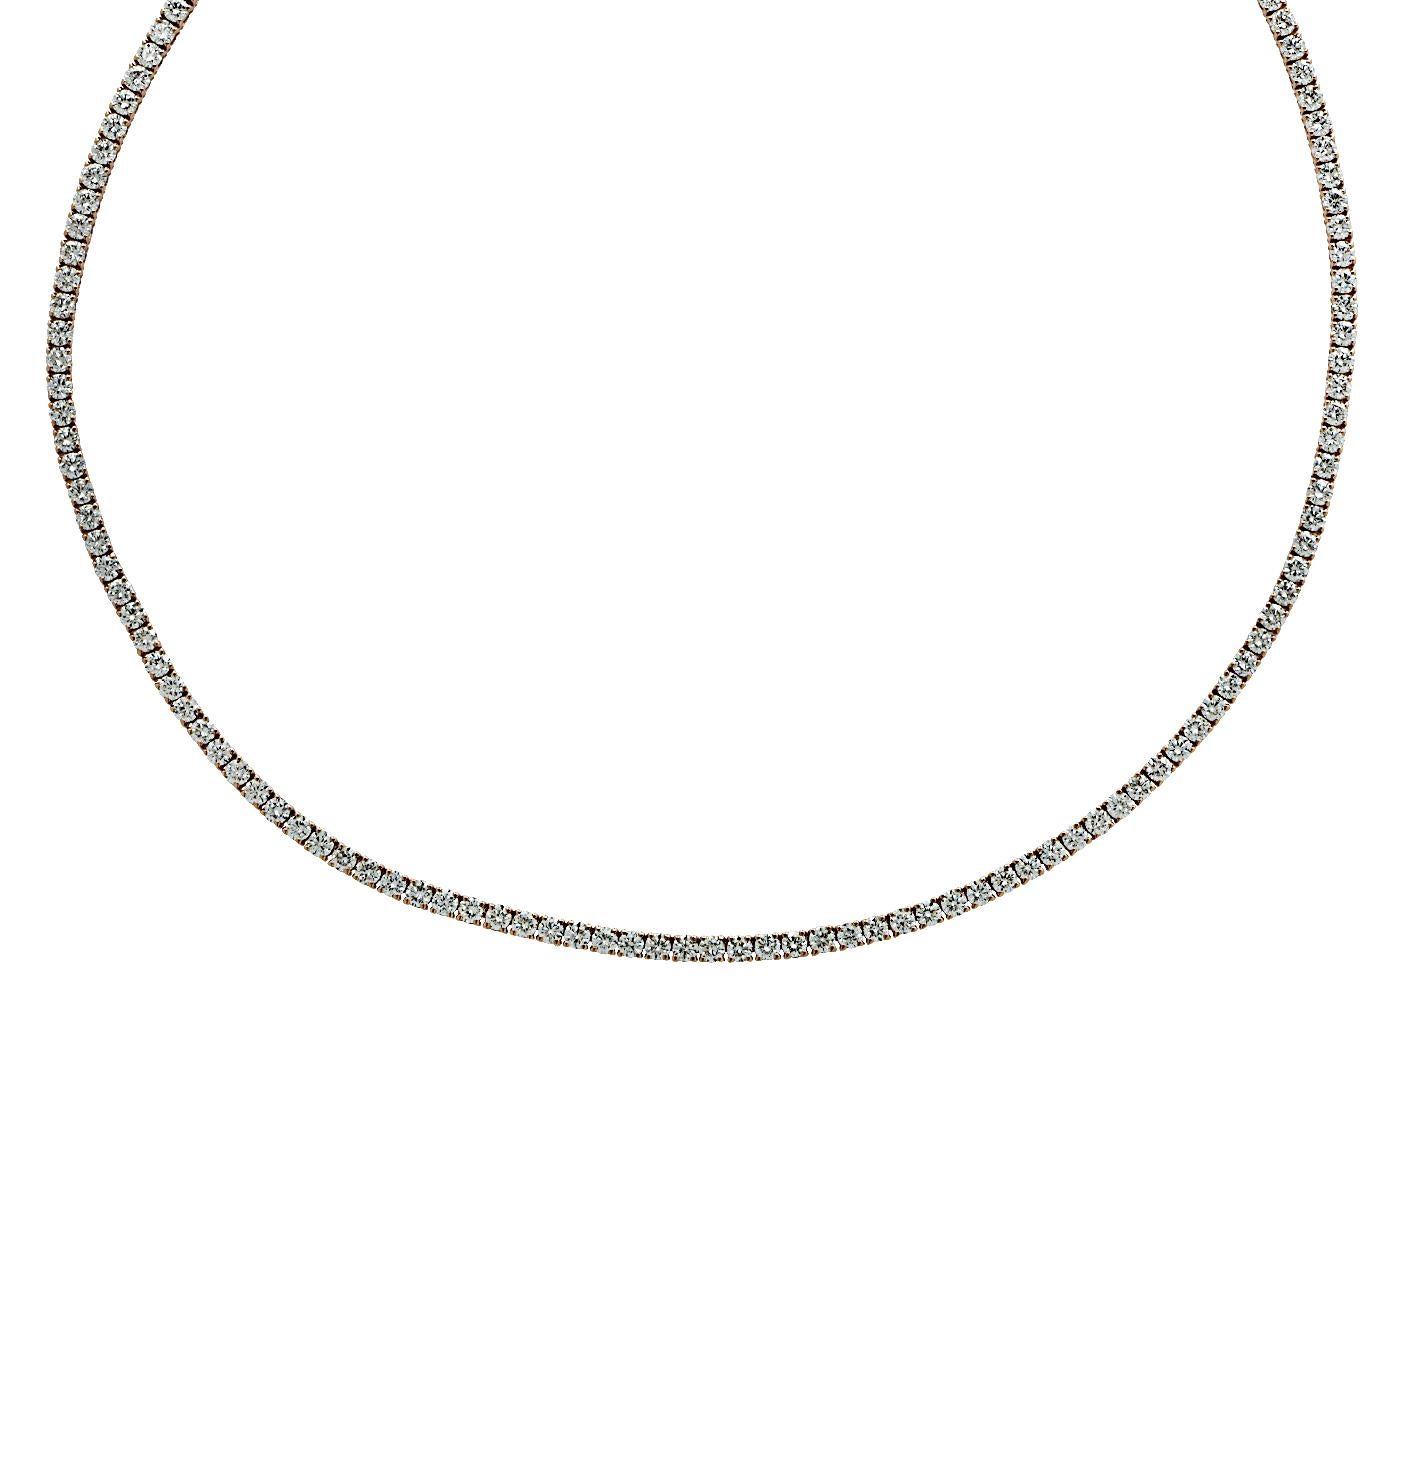 Exquisite Vivid Diamonds Straight Line diamond tennis necklace crafted in Rose Gold, showcasing round brilliant cut diamonds weighing 10.56 carats total, G color, VS-SI Clarity. Each diamond was carefully selected, perfectly matched and set in a